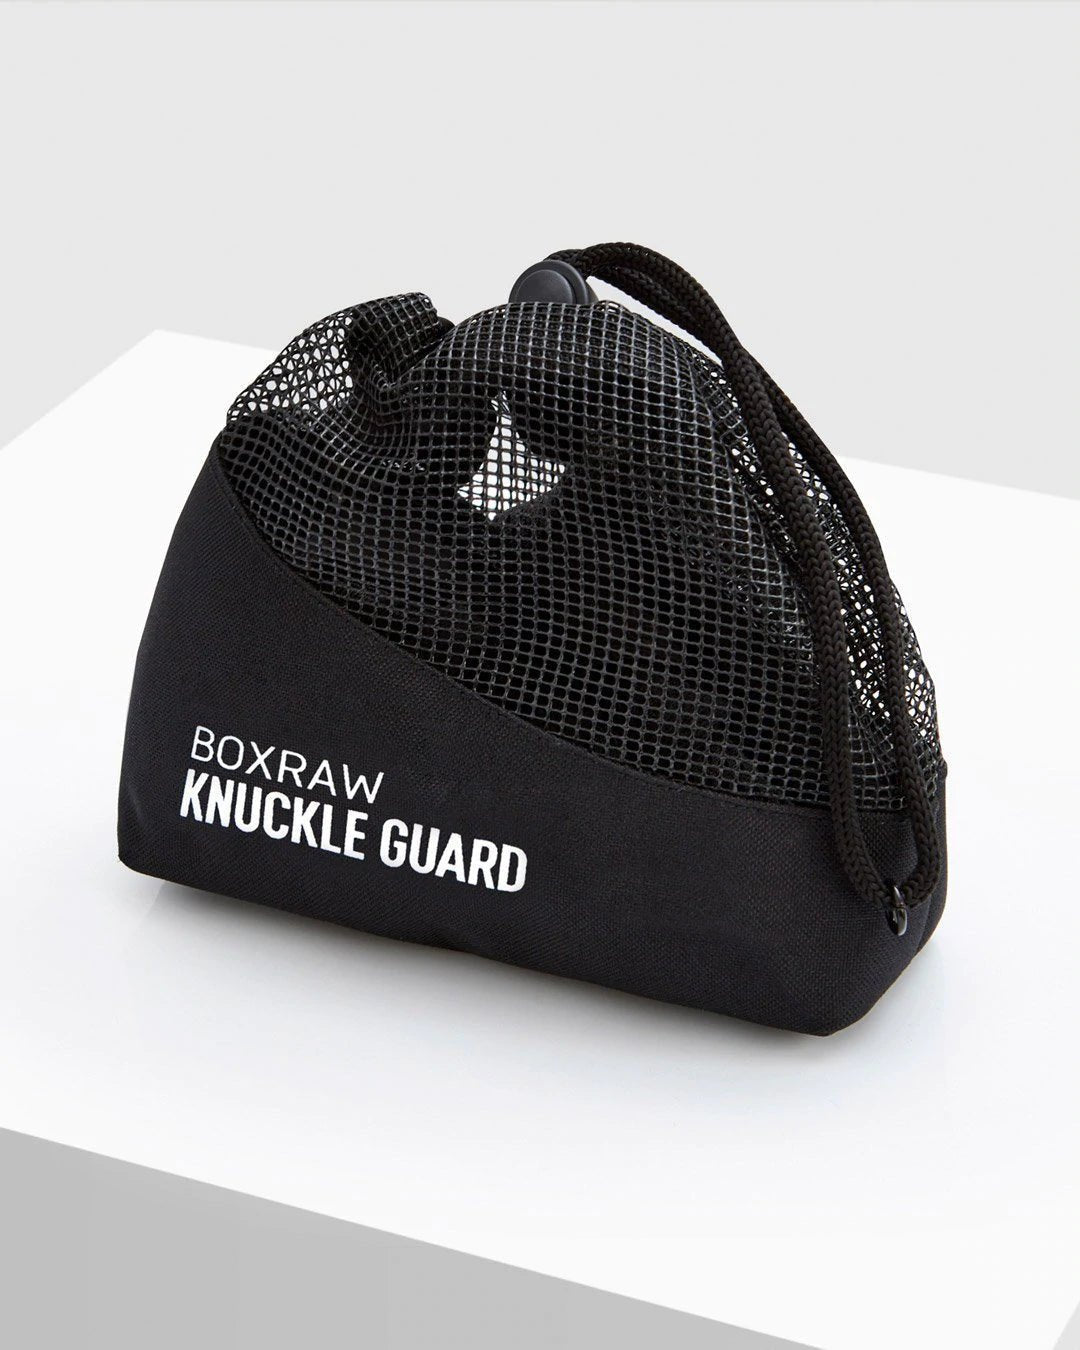 BOXRAW Knuckle Guard